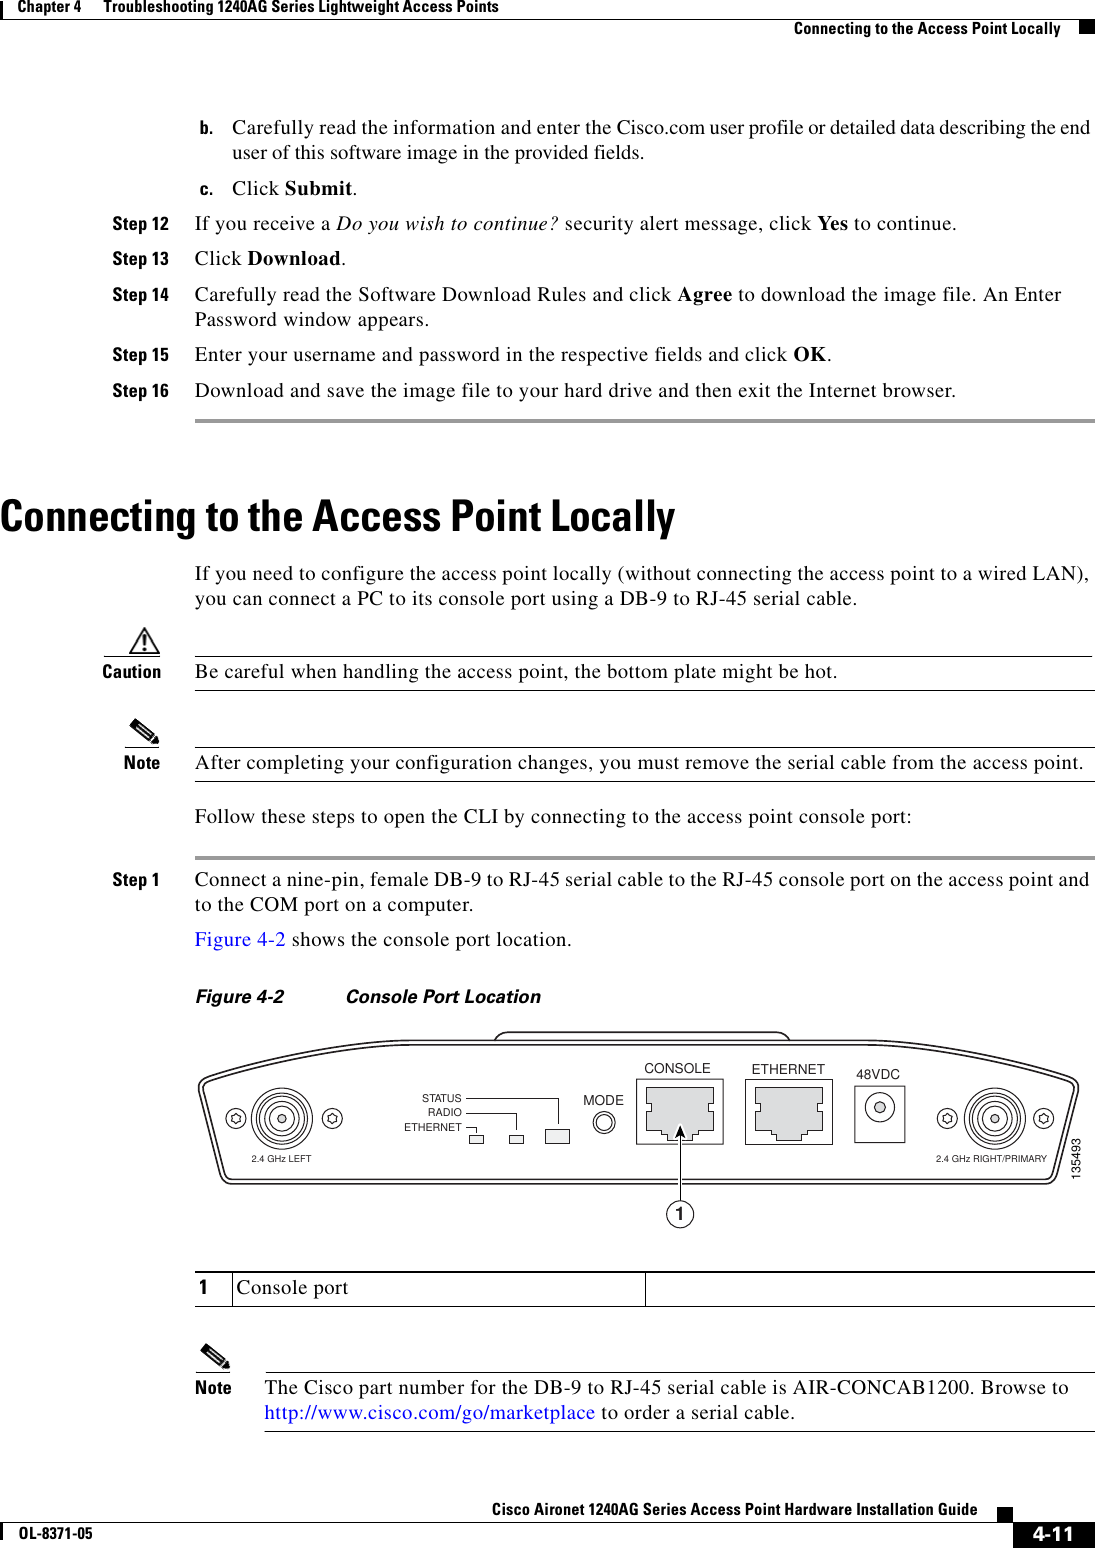  4-11Cisco Aironet 1240AG Series Access Point Hardware Installation GuideOL-8371-05Chapter 4      Troubleshooting 1240AG Series Lightweight Access PointsConnecting to the Access Point Locallyb. Carefully read the information and enter the Cisco.com user profile or detailed data describing the end user of this software image in the provided fields.c. Click Submit.Step 12 If you receive a Do you wish to continue? security alert message, click Yes to continue.Step 13 Click Download.Step 14 Carefully read the Software Download Rules and click Agree to download the image file. An Enter Password window appears.Step 15 Enter your username and password in the respective fields and click OK.Step 16 Download and save the image file to your hard drive and then exit the Internet browser. Connecting to the Access Point LocallyIf you need to configure the access point locally (without connecting the access point to a wired LAN), you can connect a PC to its console port using a DB-9 to RJ-45 serial cable. Caution Be careful when handling the access point, the bottom plate might be hot.Note After completing your configuration changes, you must remove the serial cable from the access point.Follow these steps to open the CLI by connecting to the access point console port:Step 1 Connect a nine-pin, female DB-9 to RJ-45 serial cable to the RJ-45 console port on the access point and to the COM port on a computer. Figure 4-2 shows the console port location.Figure 4-2 Console Port Location Note The Cisco part number for the DB-9 to RJ-45 serial cable is AIR-CONCAB1200. Browse to http://www.cisco.com/go/marketplace to order a serial cable.1Console portSTATUSRADIOETHERNETMODECONSOLE ETHERNET 48VDC2.4 GHz RIGHT/PRIMARY 2.4 GHz LEFT1354931